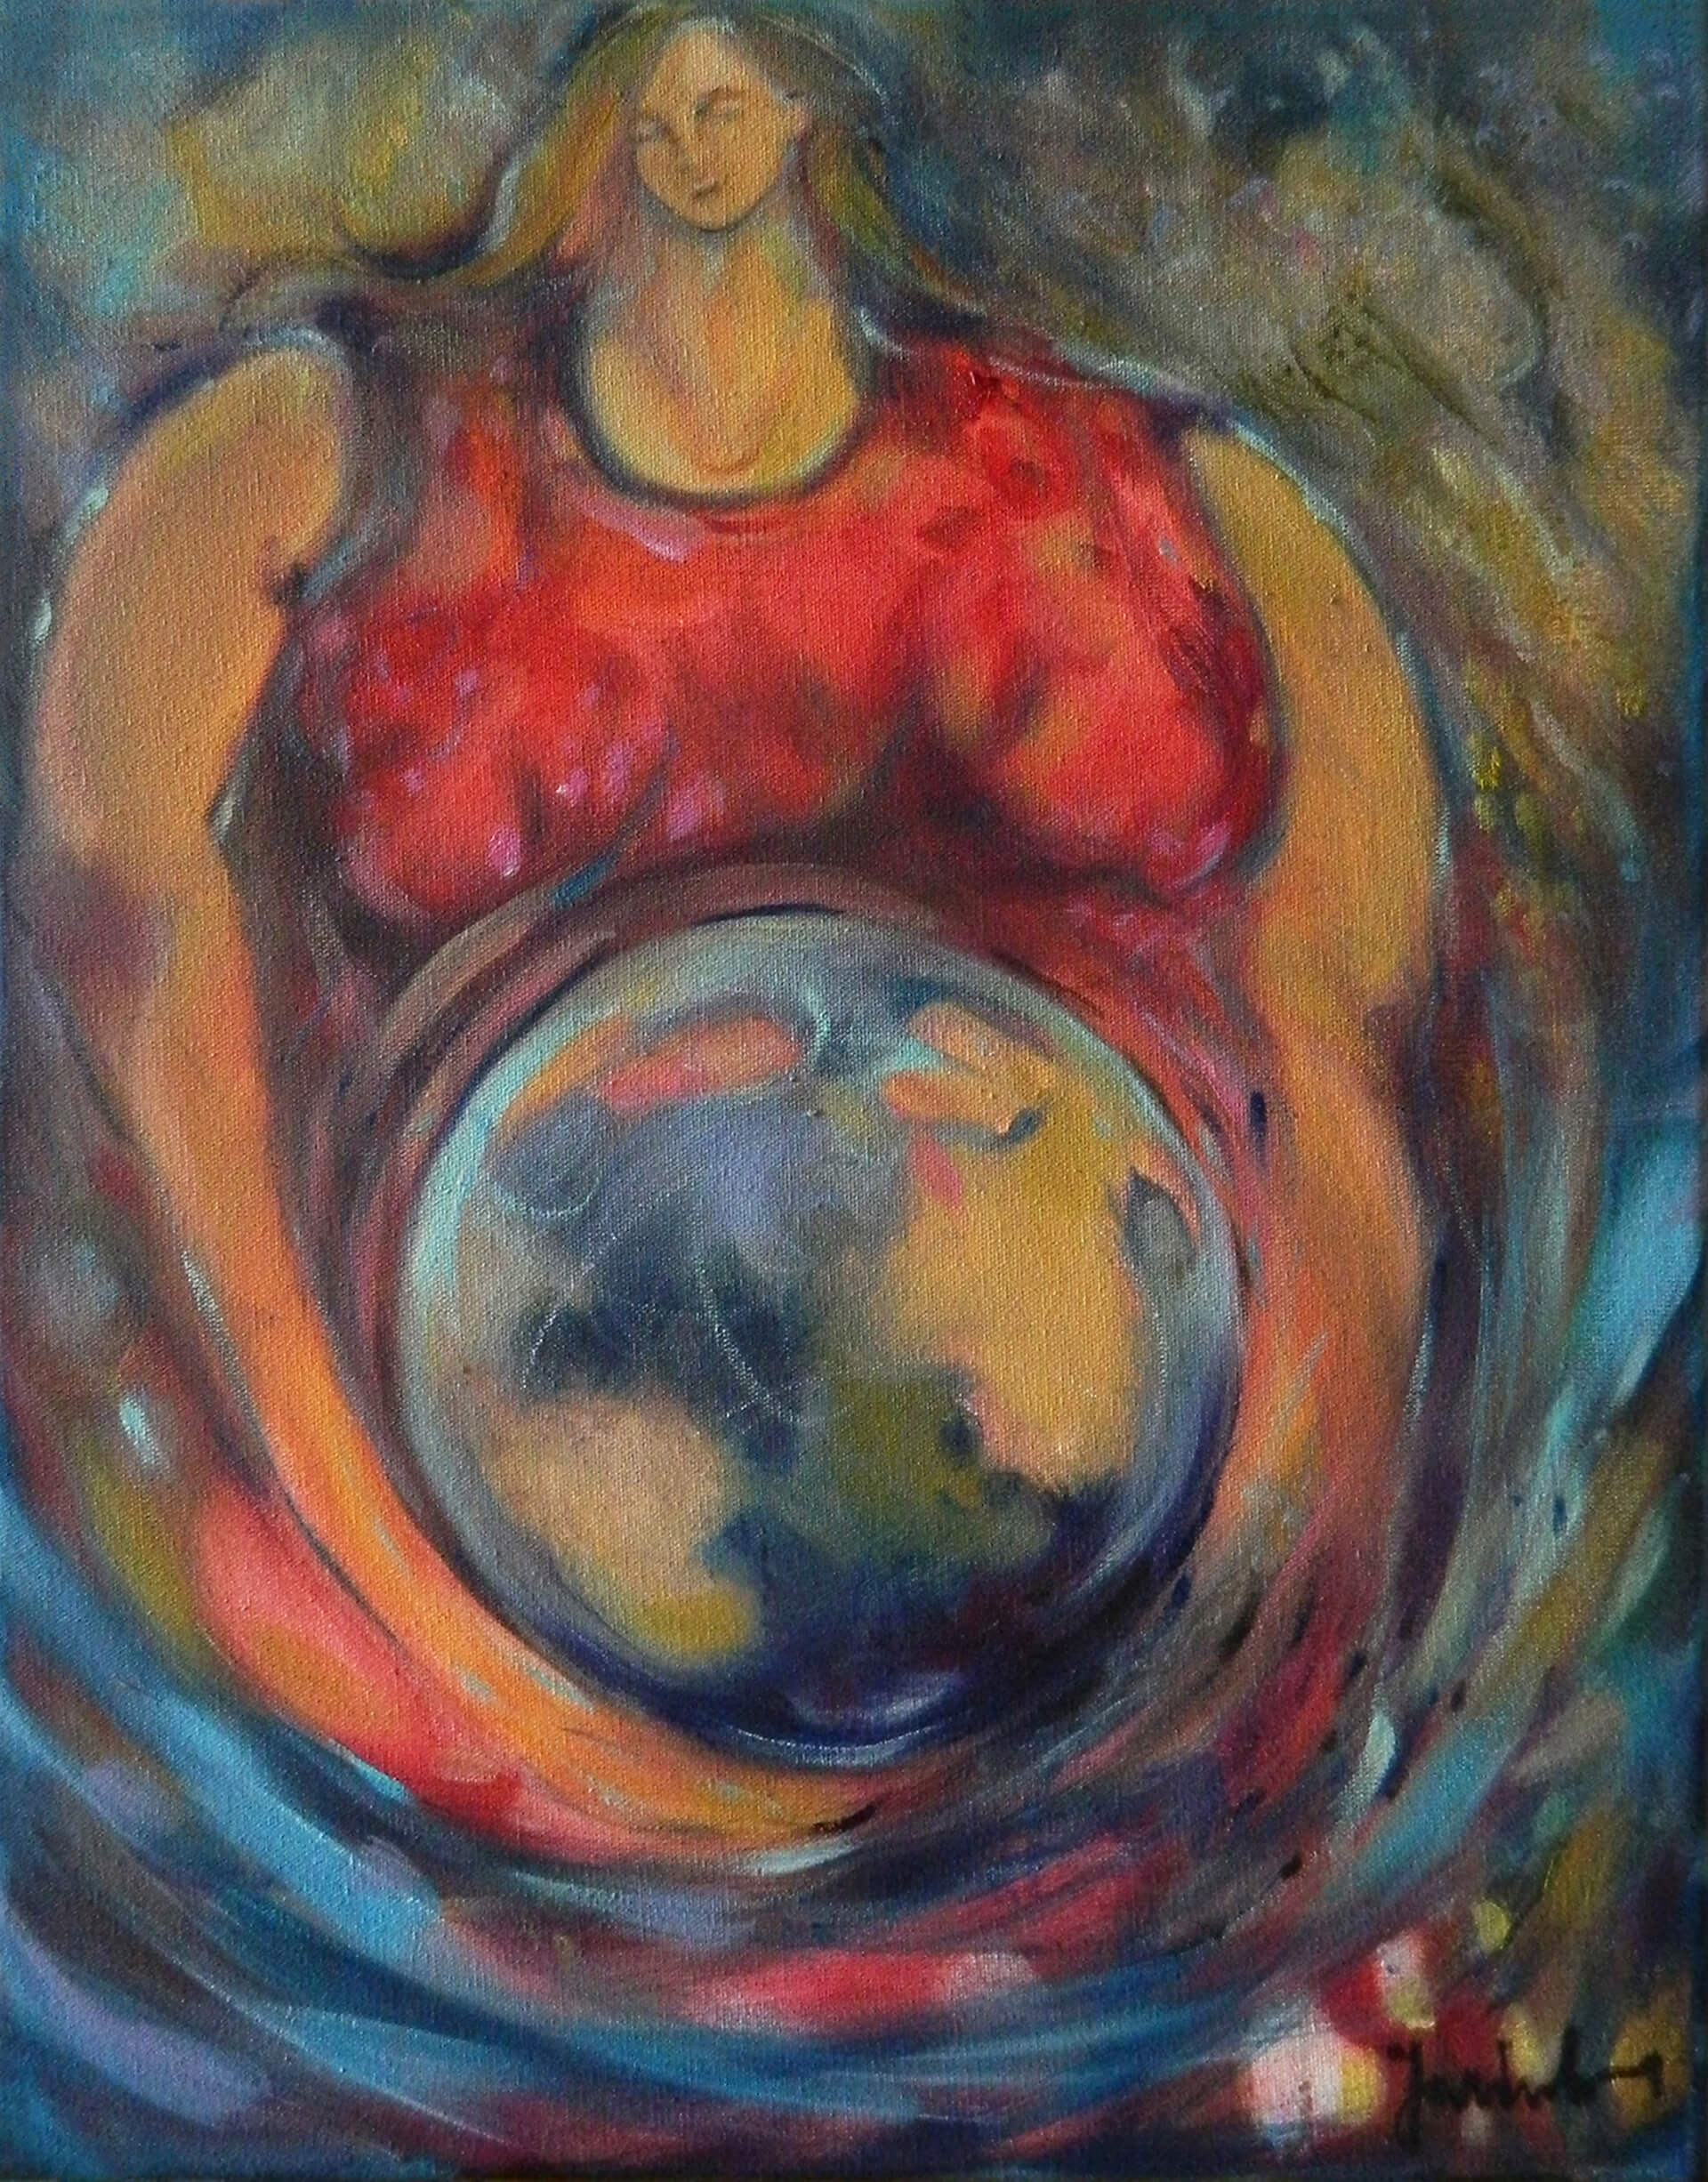 Earth. 40x50 cm. Oil on canvas. Sold